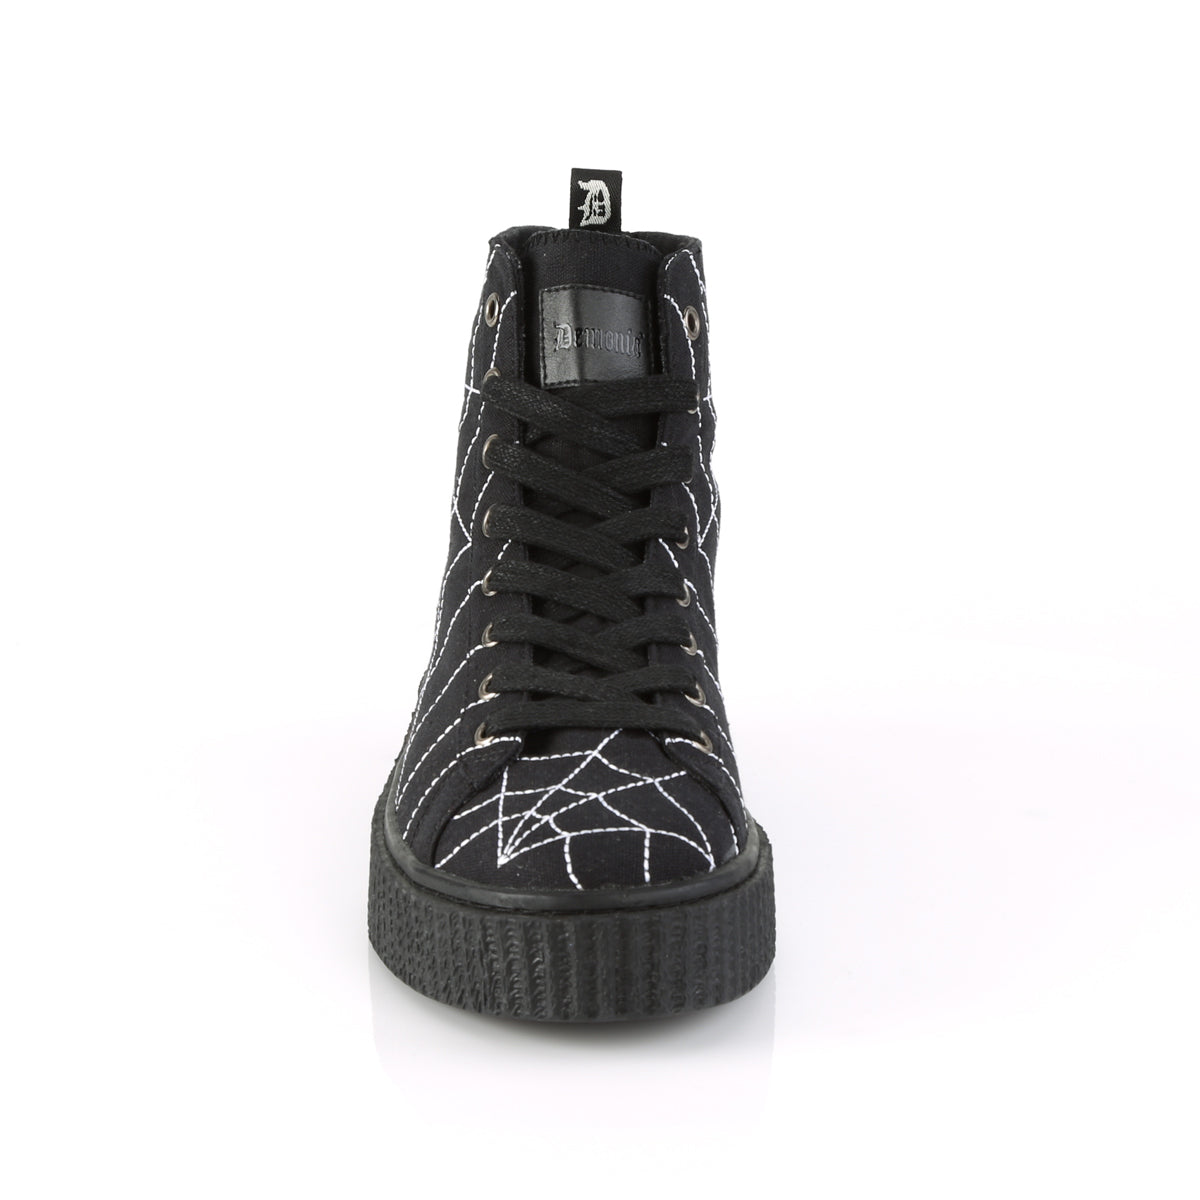 DemoniaCult Mens Ankle Boots SNEEKER-250 Blk Canvas